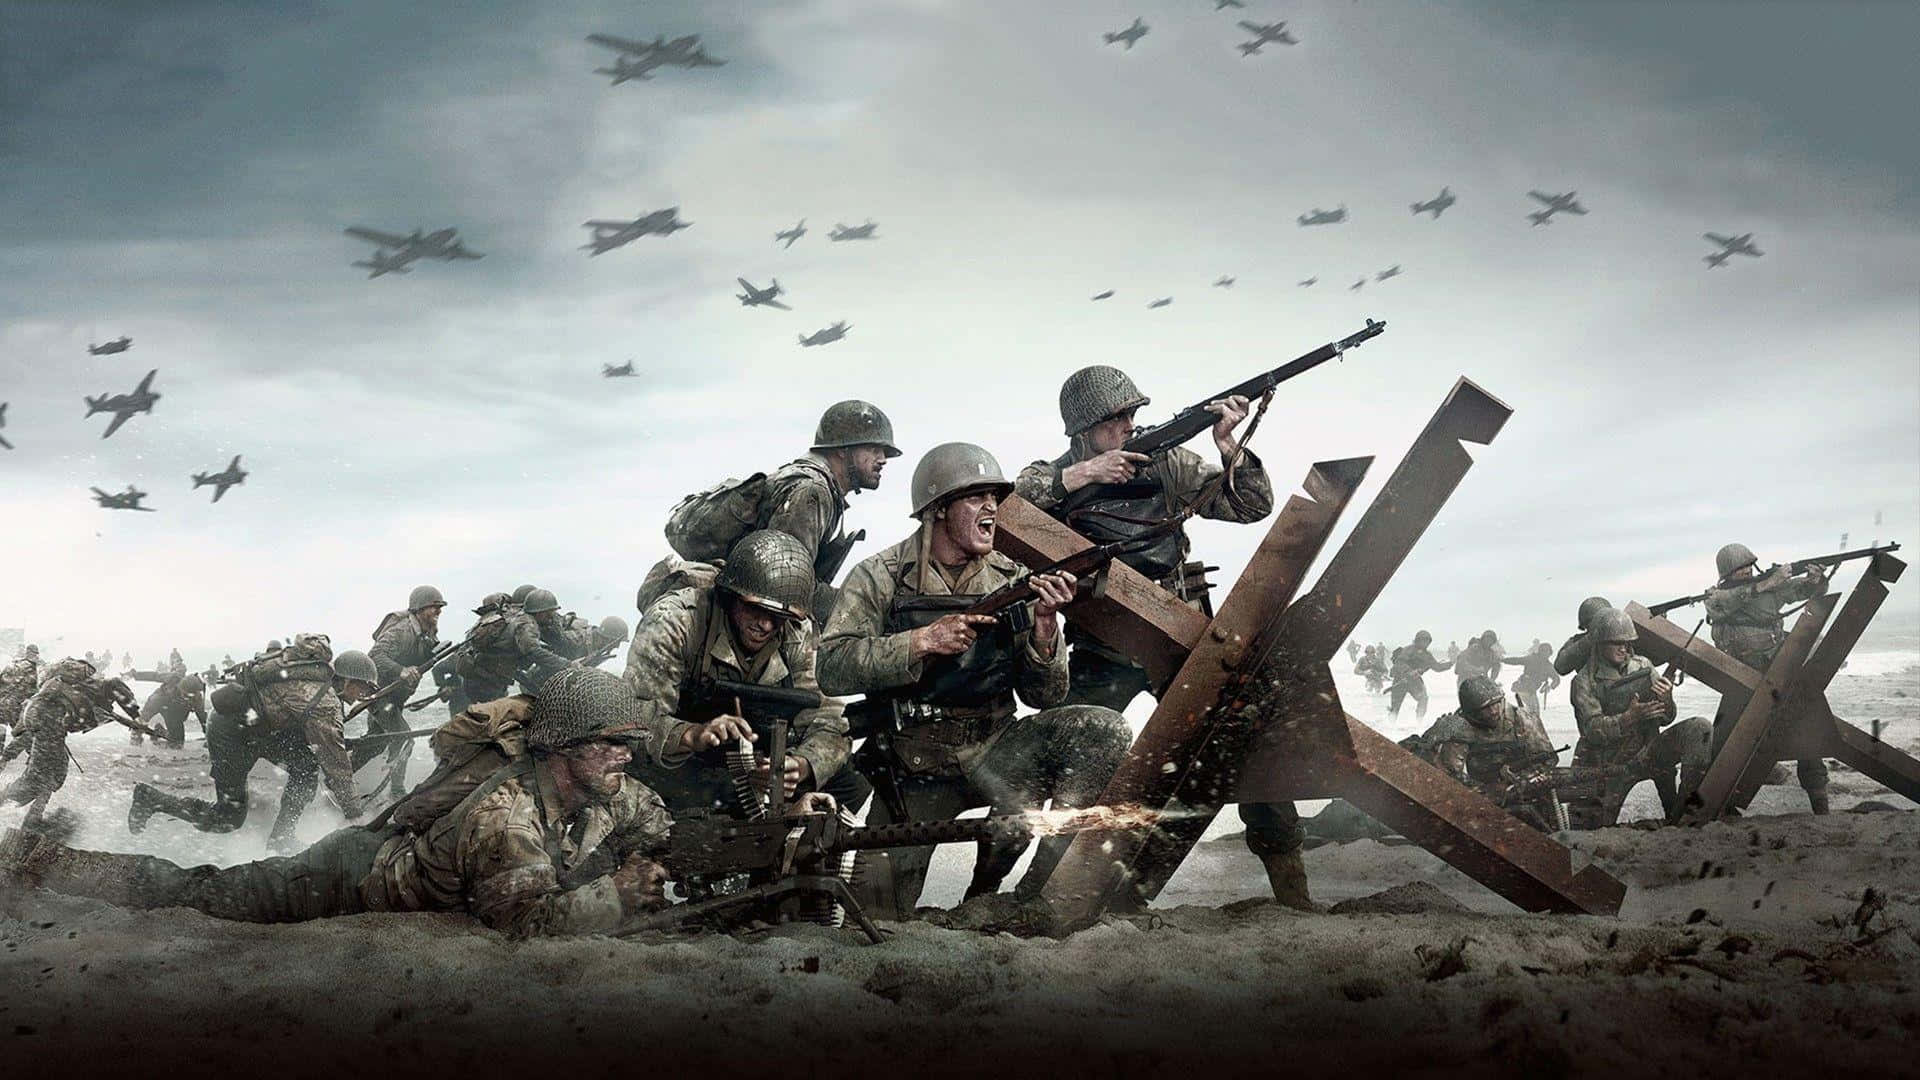 W W2_ Battle_ Scene_with_ Soldiers_and_ Aircraft.jpg Wallpaper